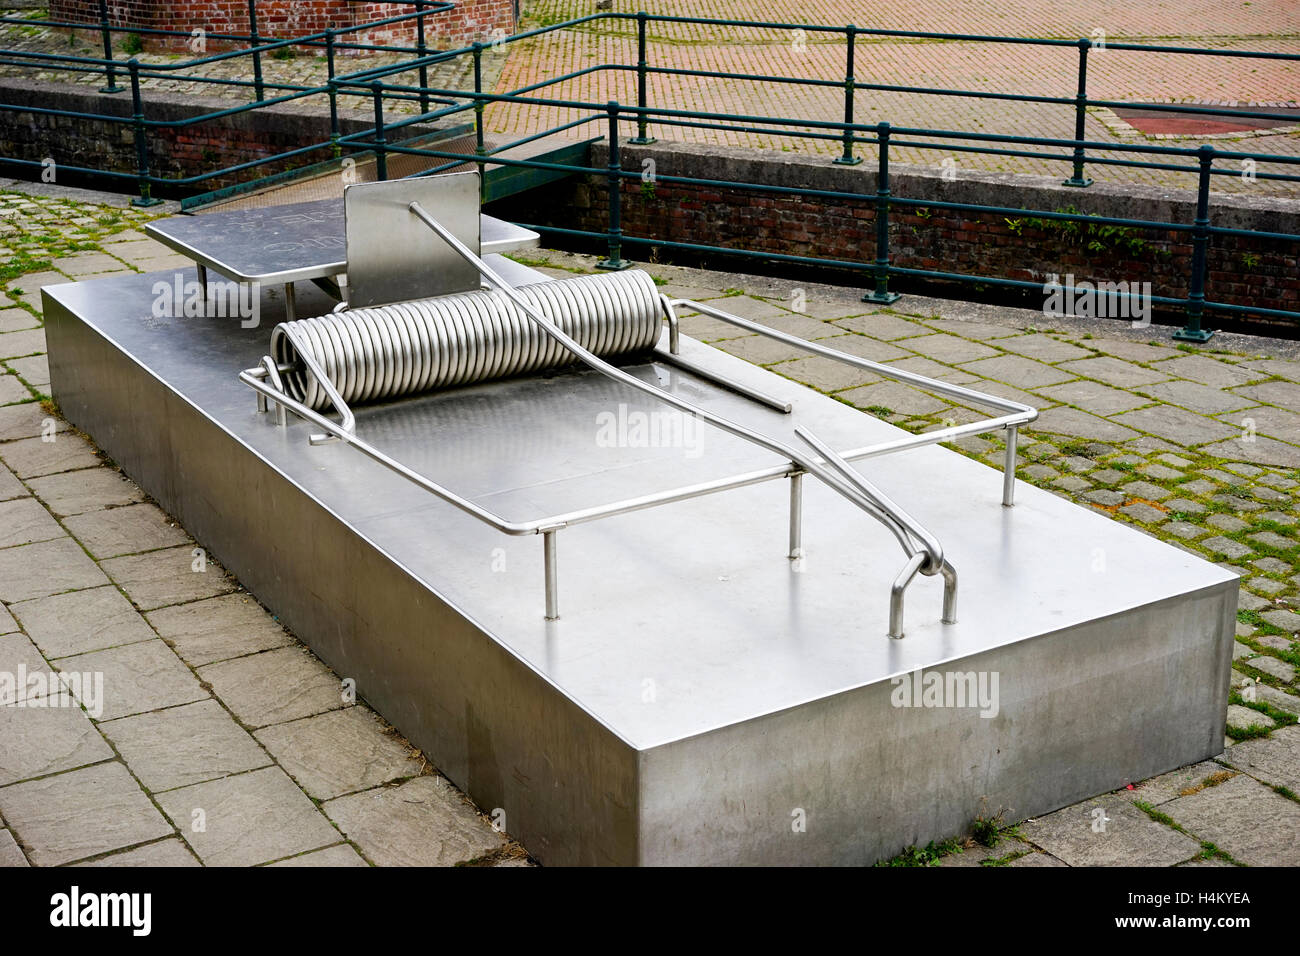 Giant Stainless Steel model of a mouse trap at Burrs Country Park and part of the Industrial Heritage site, Bury, Lancashire,UK. Stock Photo